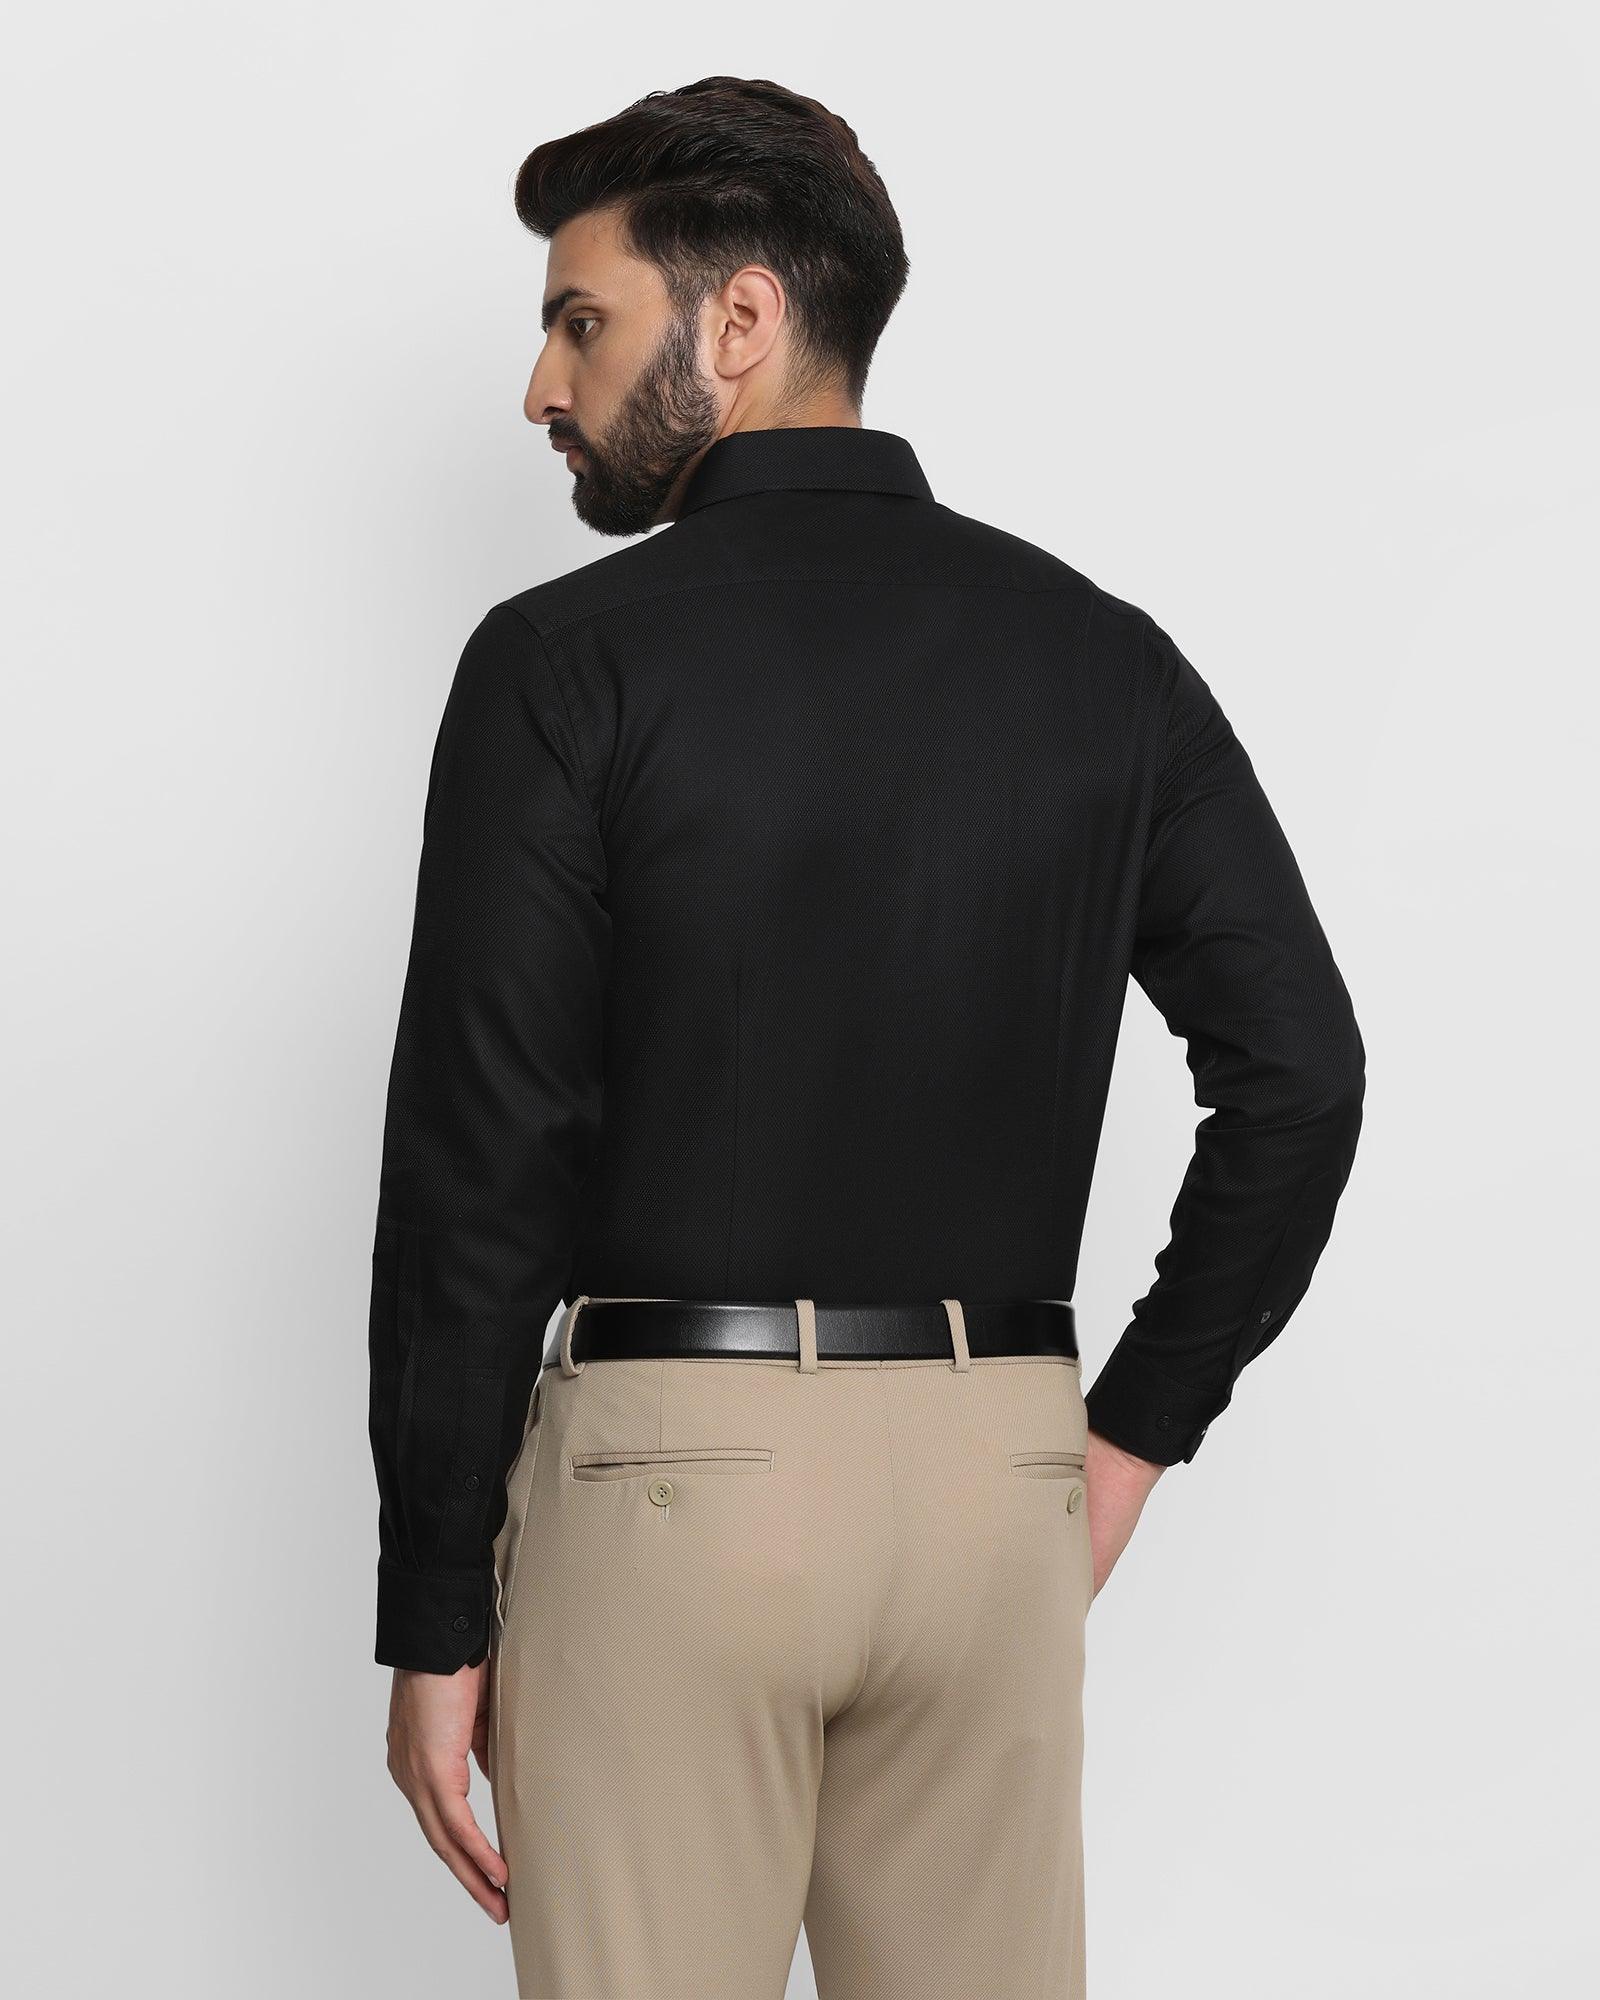 Next Look by Raymond Men Solid Formal Black Shirt - Buy Next Look by  Raymond Men Solid Formal Black Shirt Online at Best Prices in India |  Flipkart.com